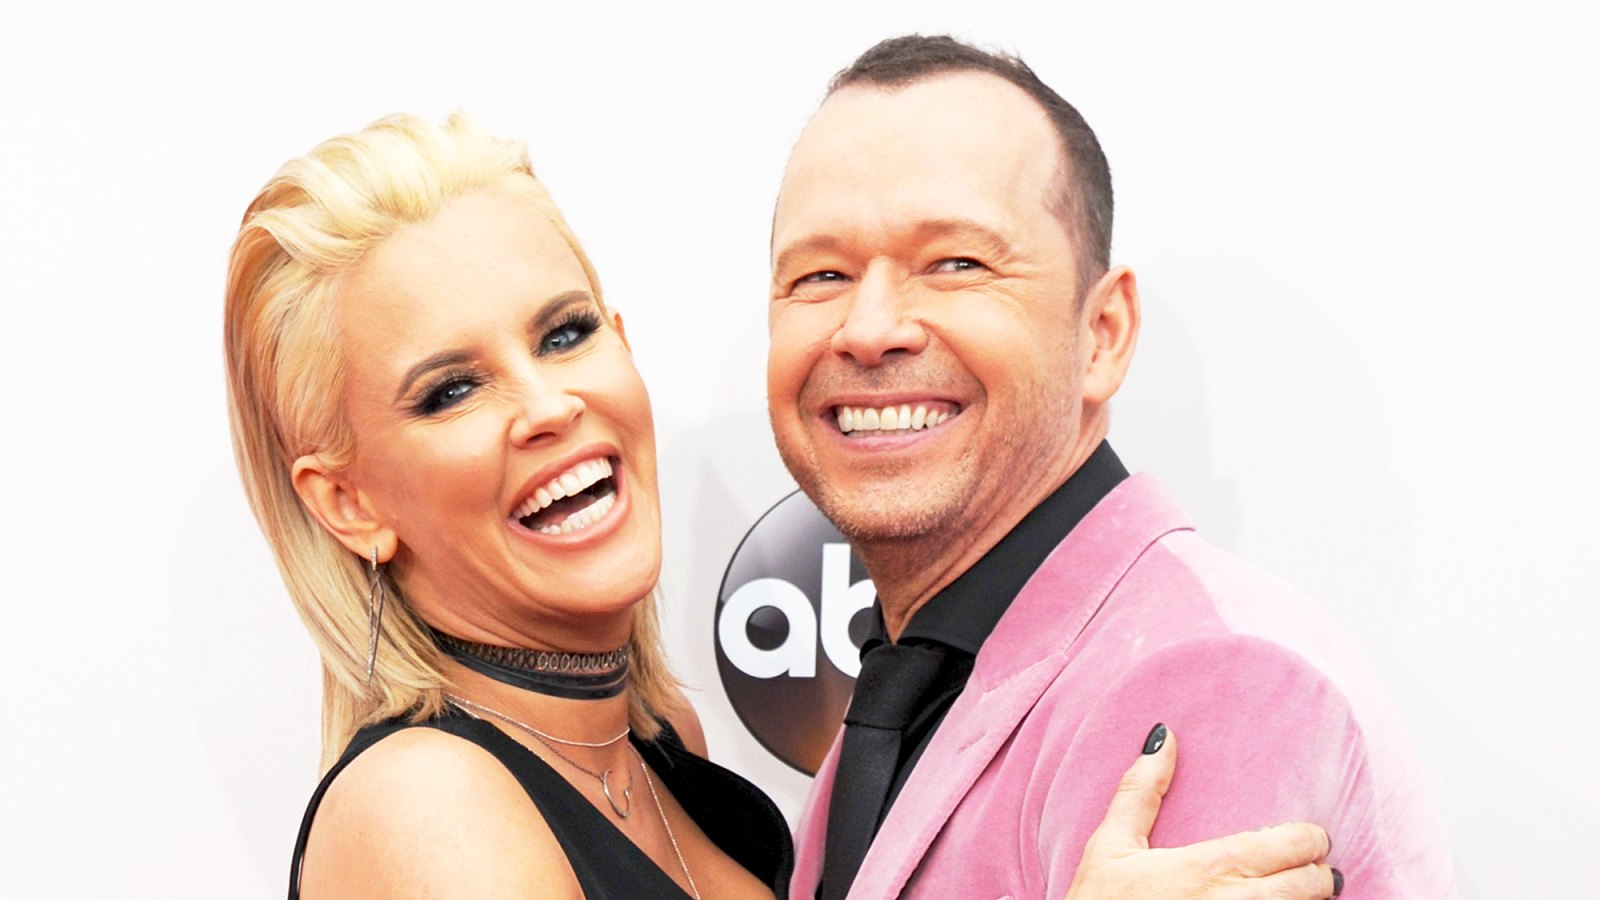 Jenny McCarthy and Donnie Wahlberg arrive at the 2016 American Music Awards at Microsoft Theater in Los Angeles, California.